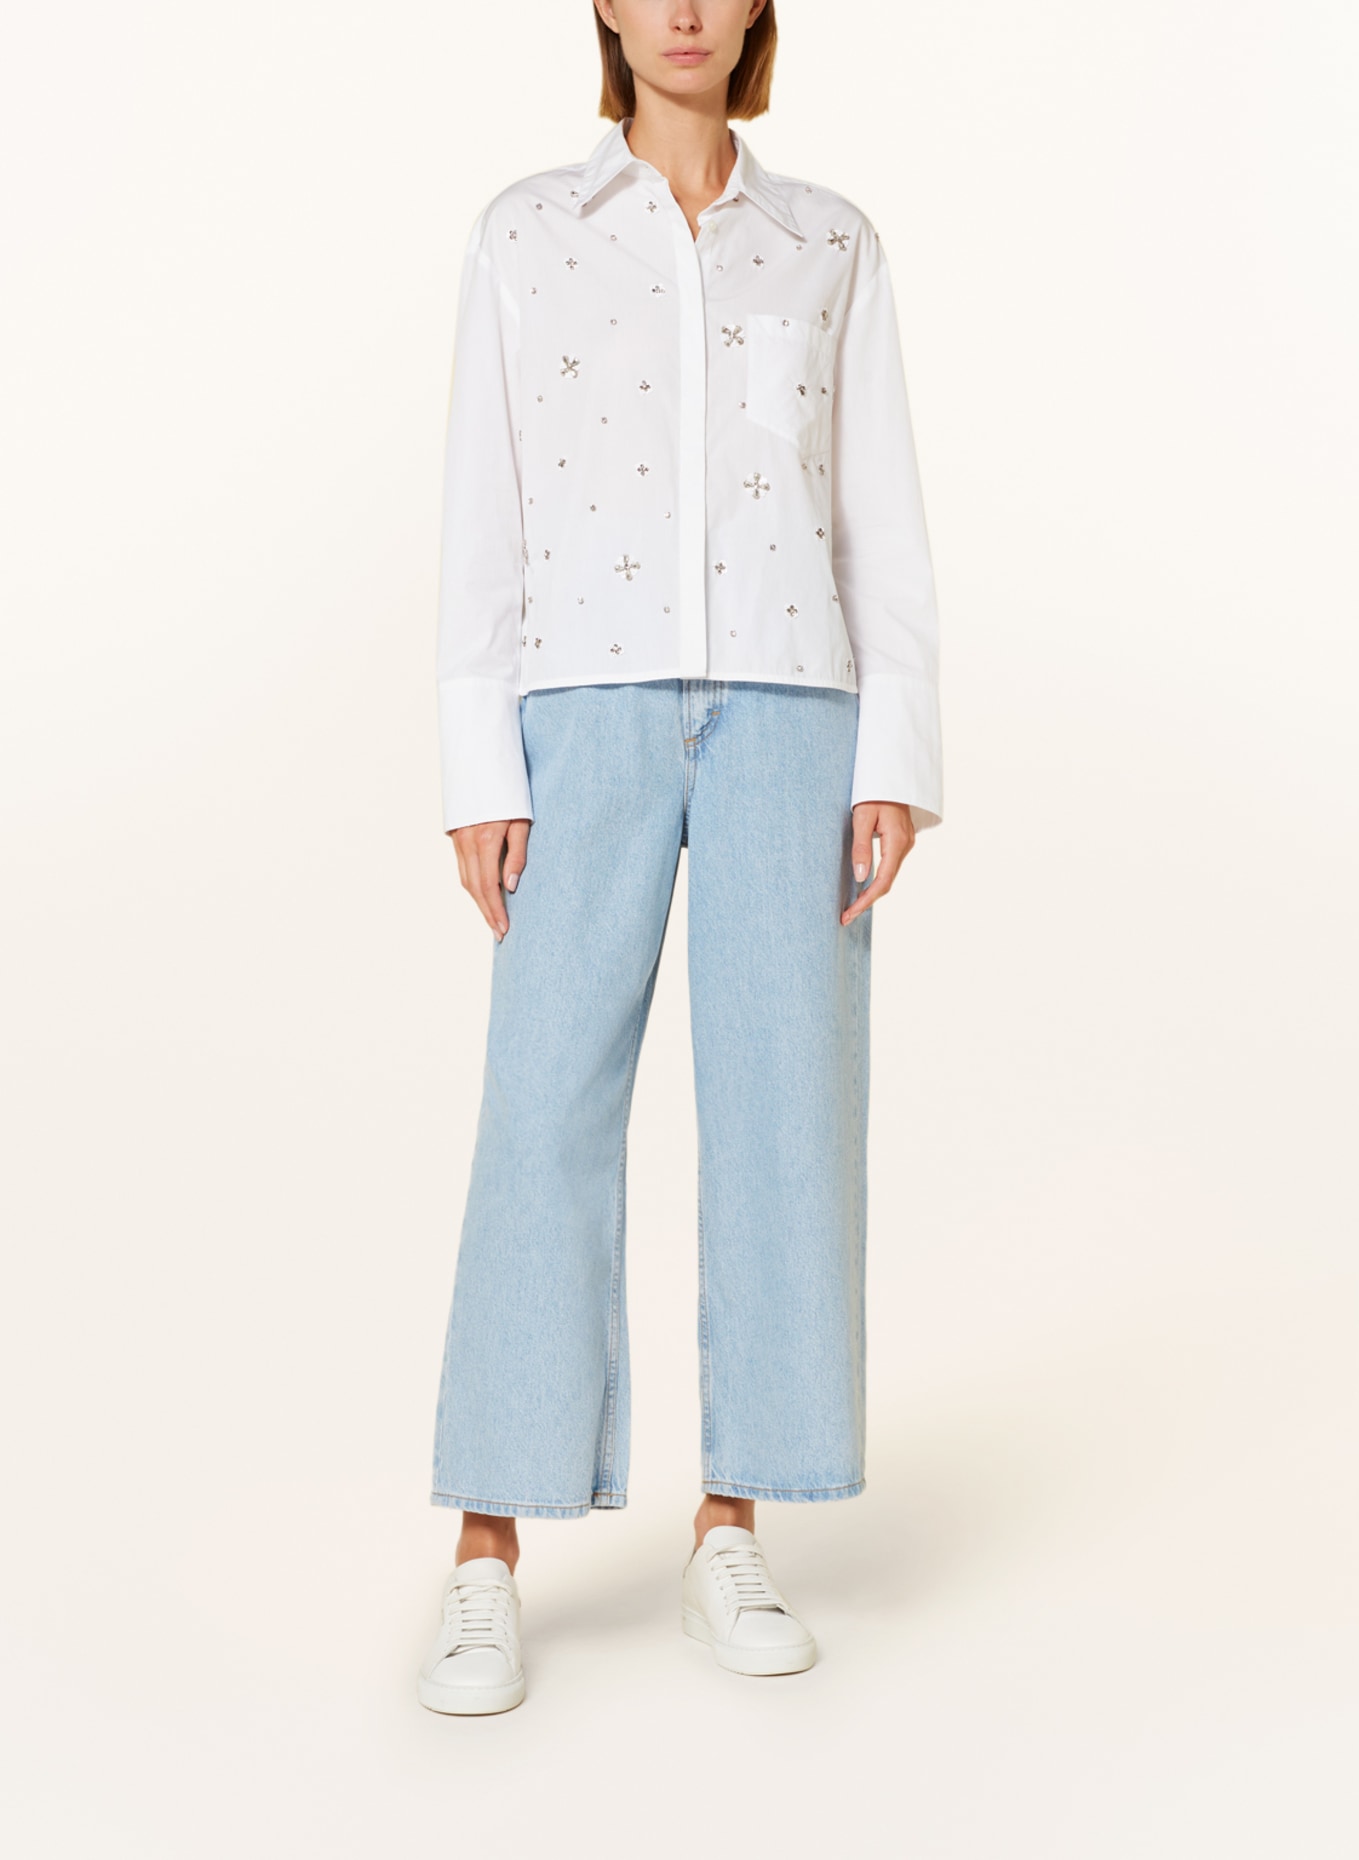 MAX & Co. Shirt blouse SORRISO with sequins and decorative gems, Color: WHITE (Image 2)